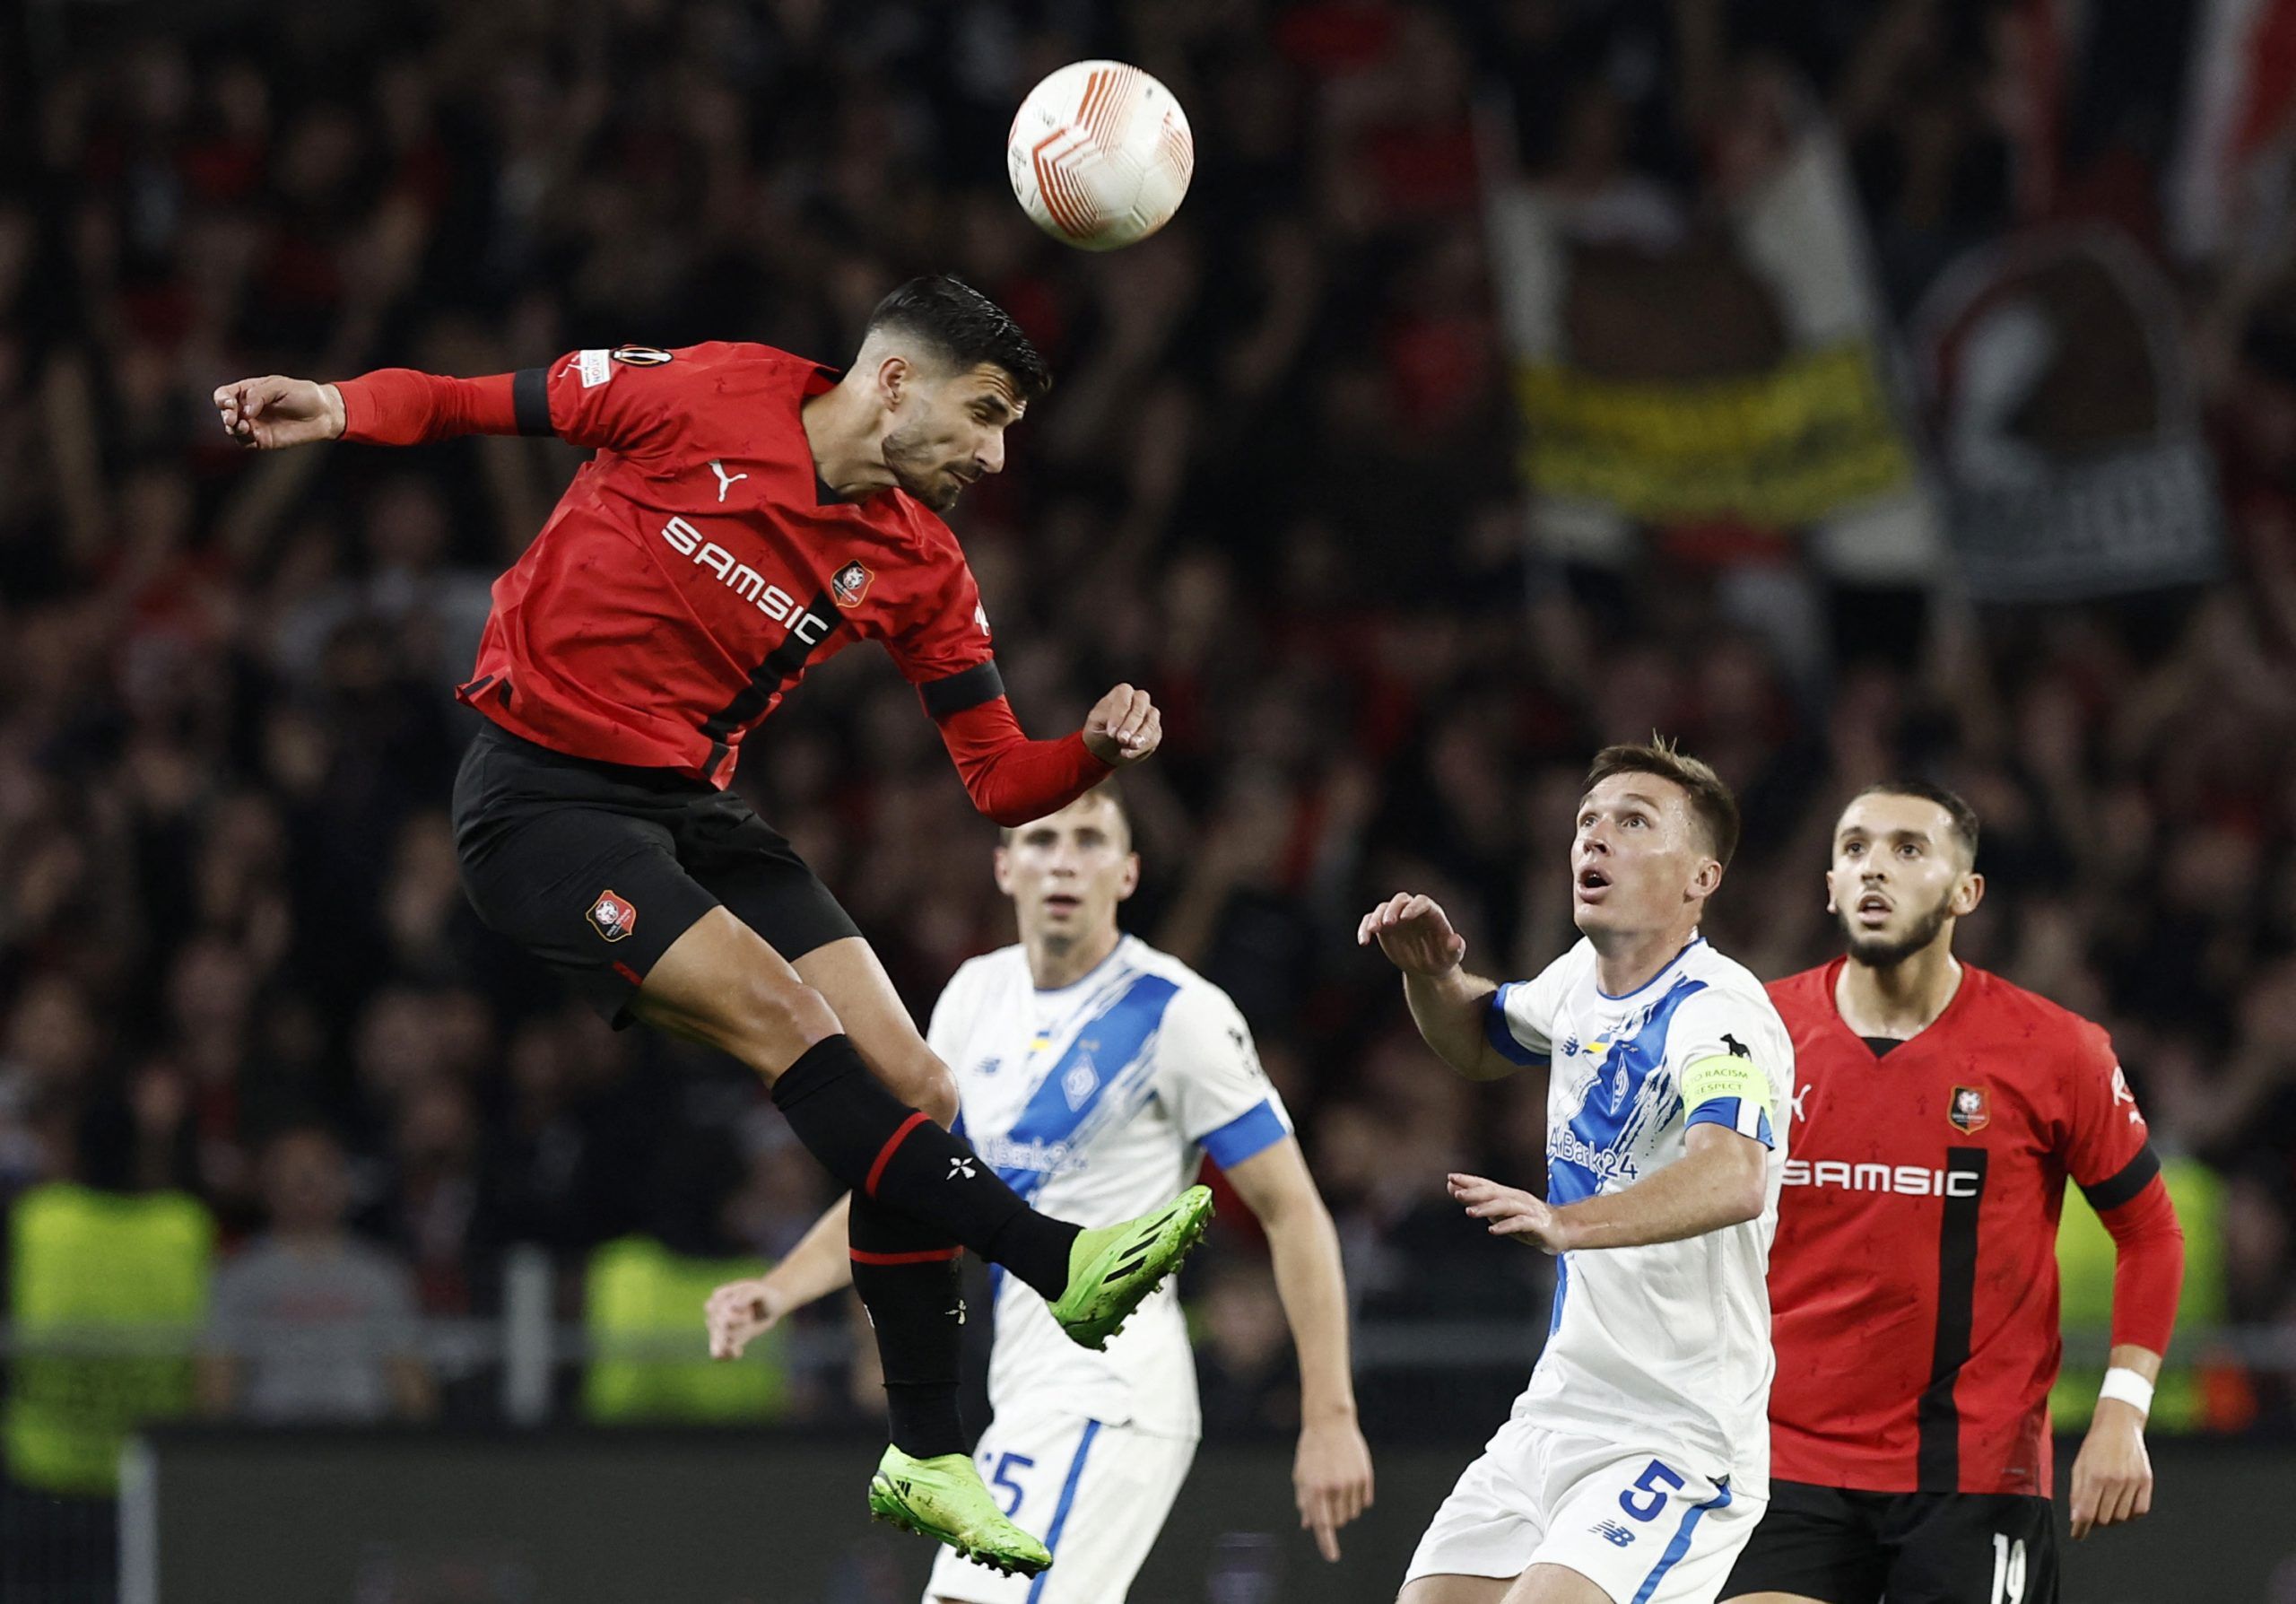 Soccer Football - Europa League - Group B - Stade Rennes v Dynamo Kyiv - Roazhon Park, Rennes, France - October 6, 2022 Stade Rennes' Martin Terrier in action with Dynamo Kyiv's Sergiy Sydorchuk REUTERS/Benoit Tessier